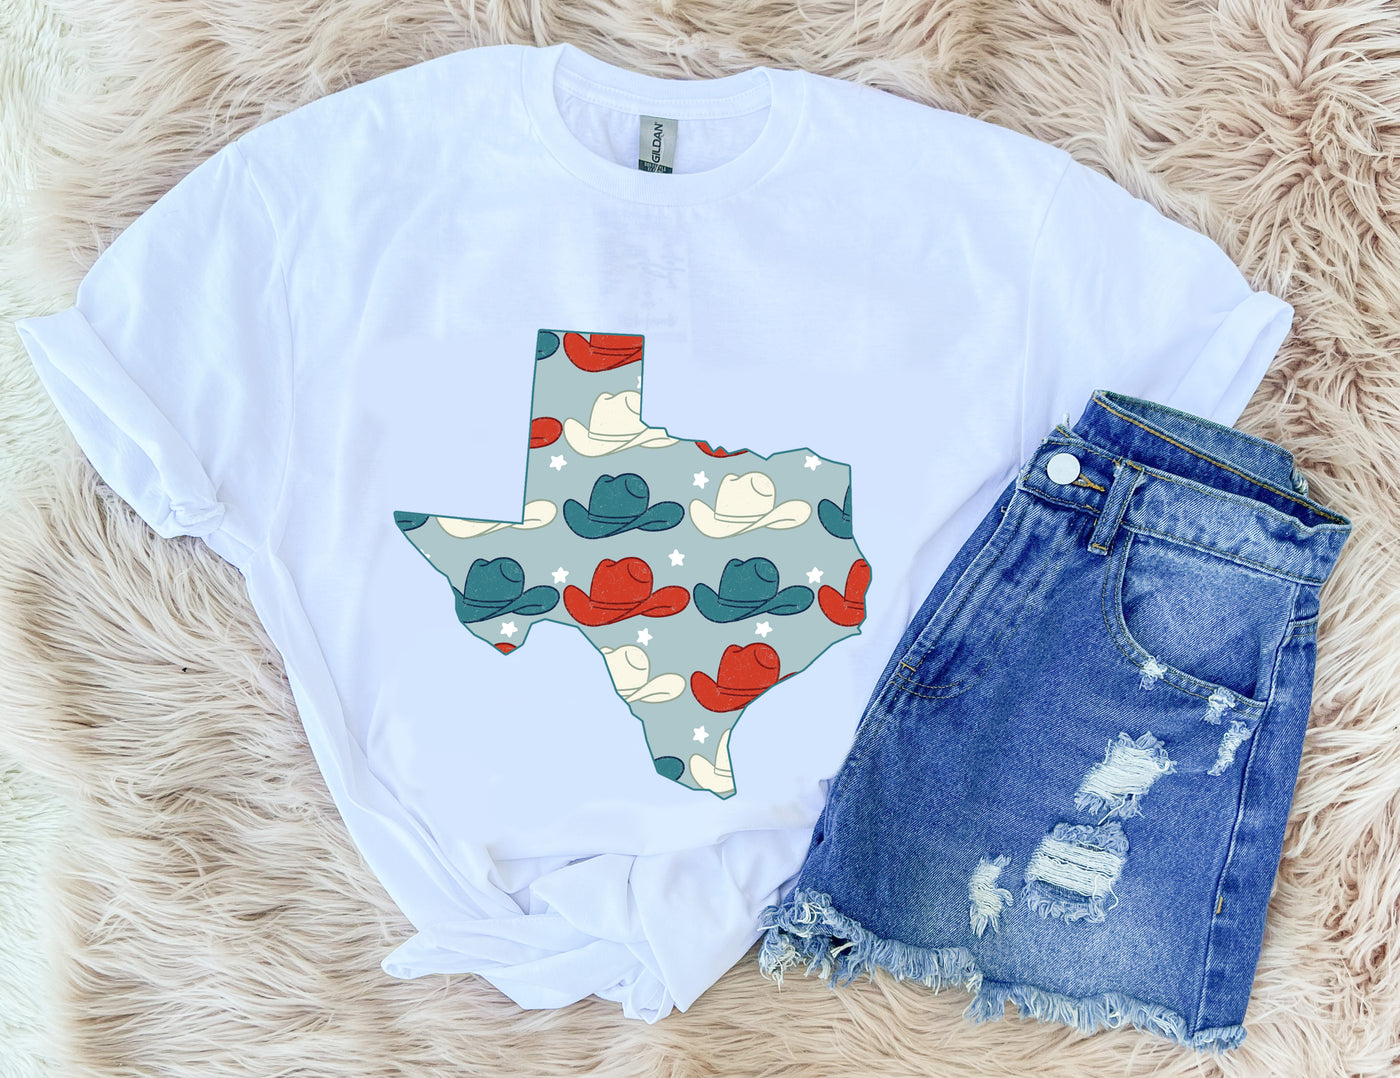 Texas Hat - Graphic Top-110 GRAPHIC TEE-Adelyn Elaine's-Adelyn Elaine's Boutique, Women's Clothing Boutique in Gilmer, TX